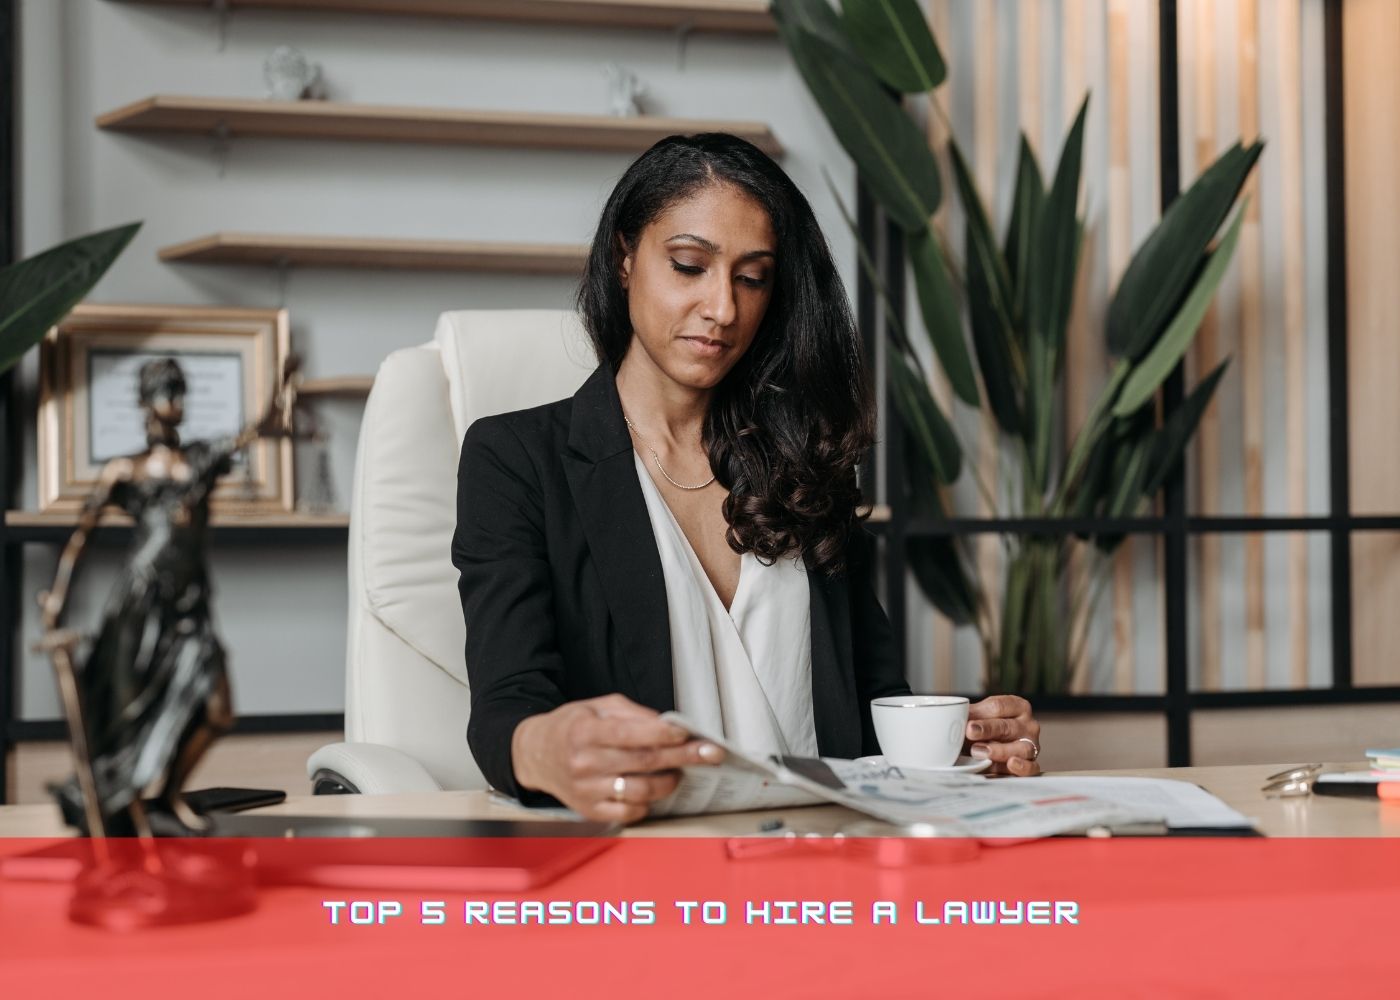 Top 5 Reasons to Hire a Lawyer